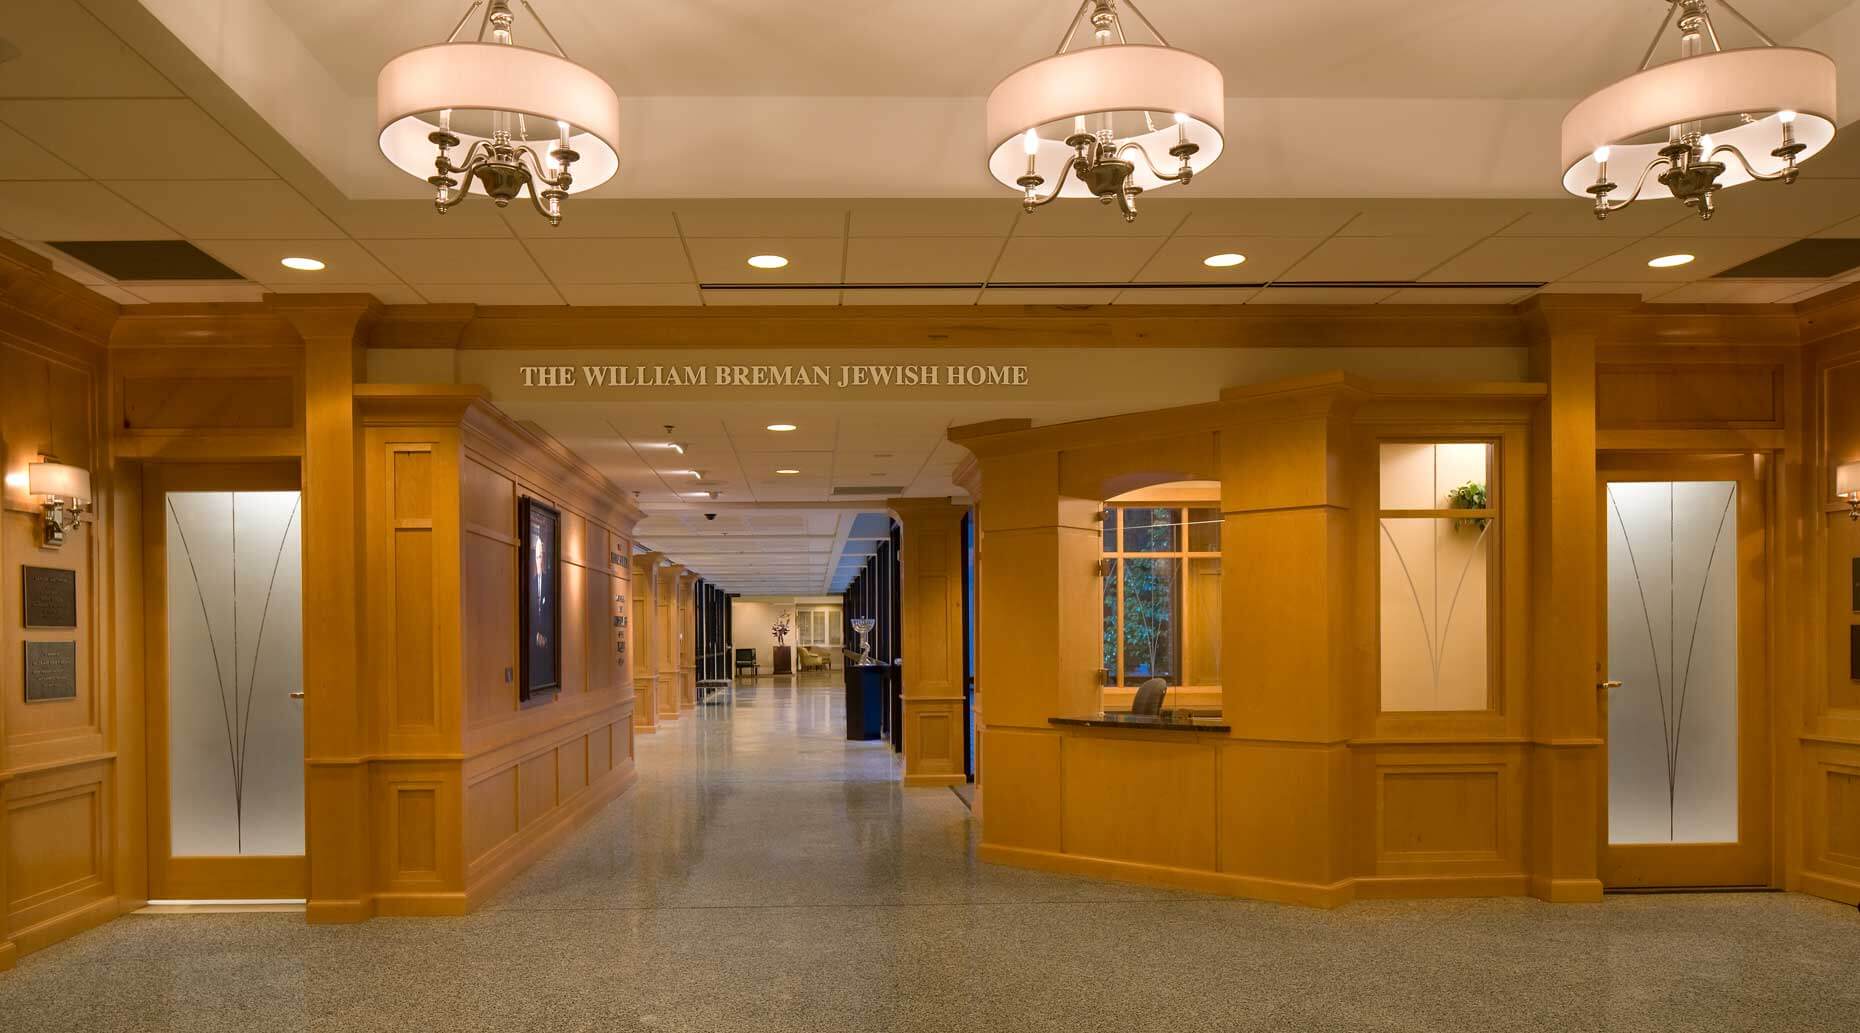 A comprehensive view of the entry, millwork, and hallway at the William Breman Jewish Home